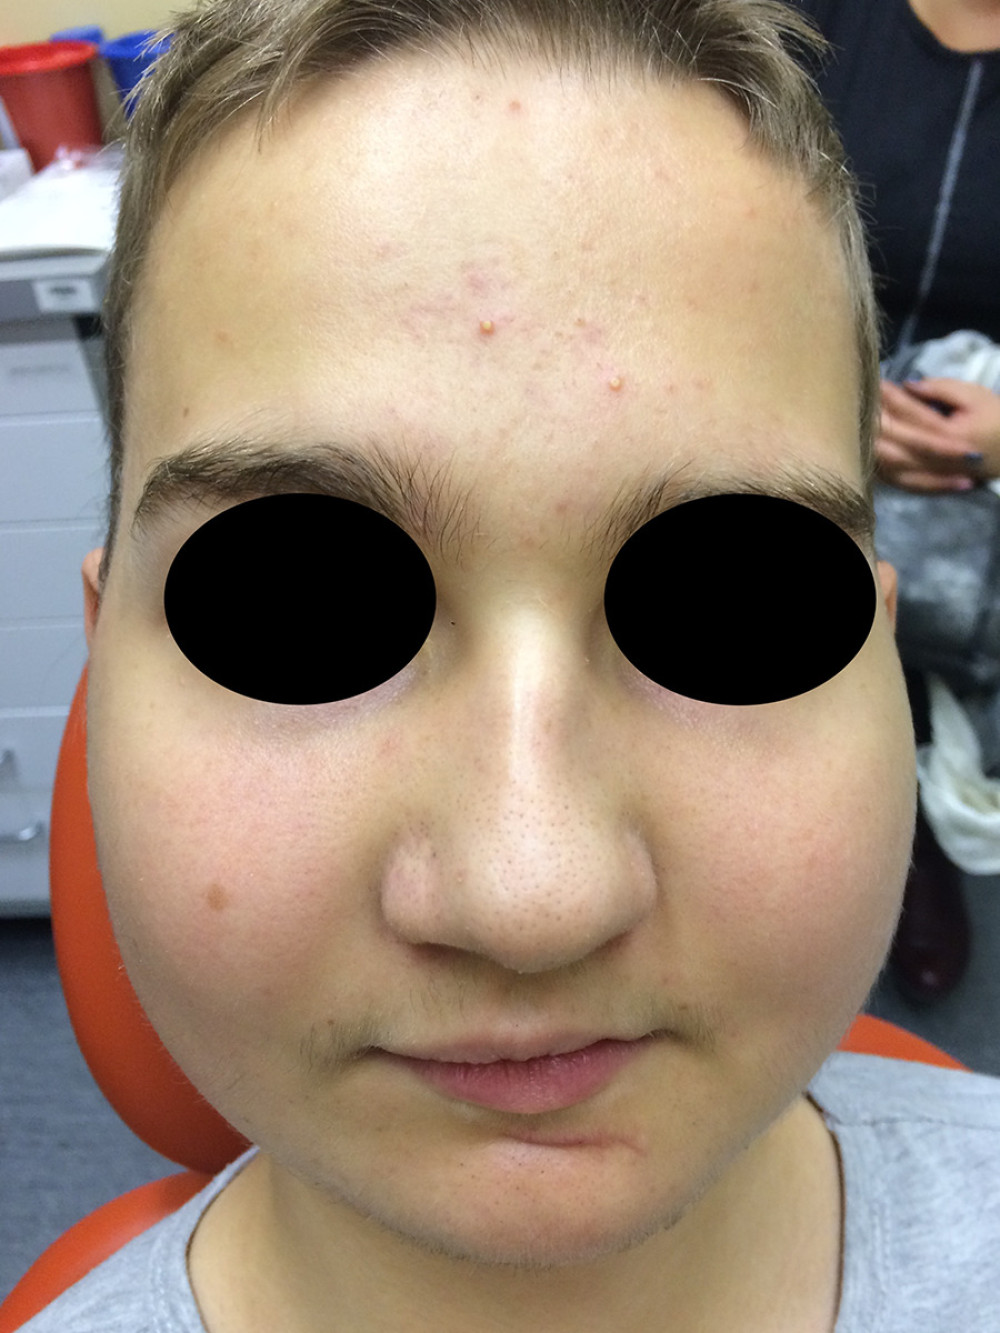 Clinical status of the patient 6 days after surgery. The external clinical examination shows bilateral swelling of the soft tissues of the cheeks and parotideomasseteric regions.